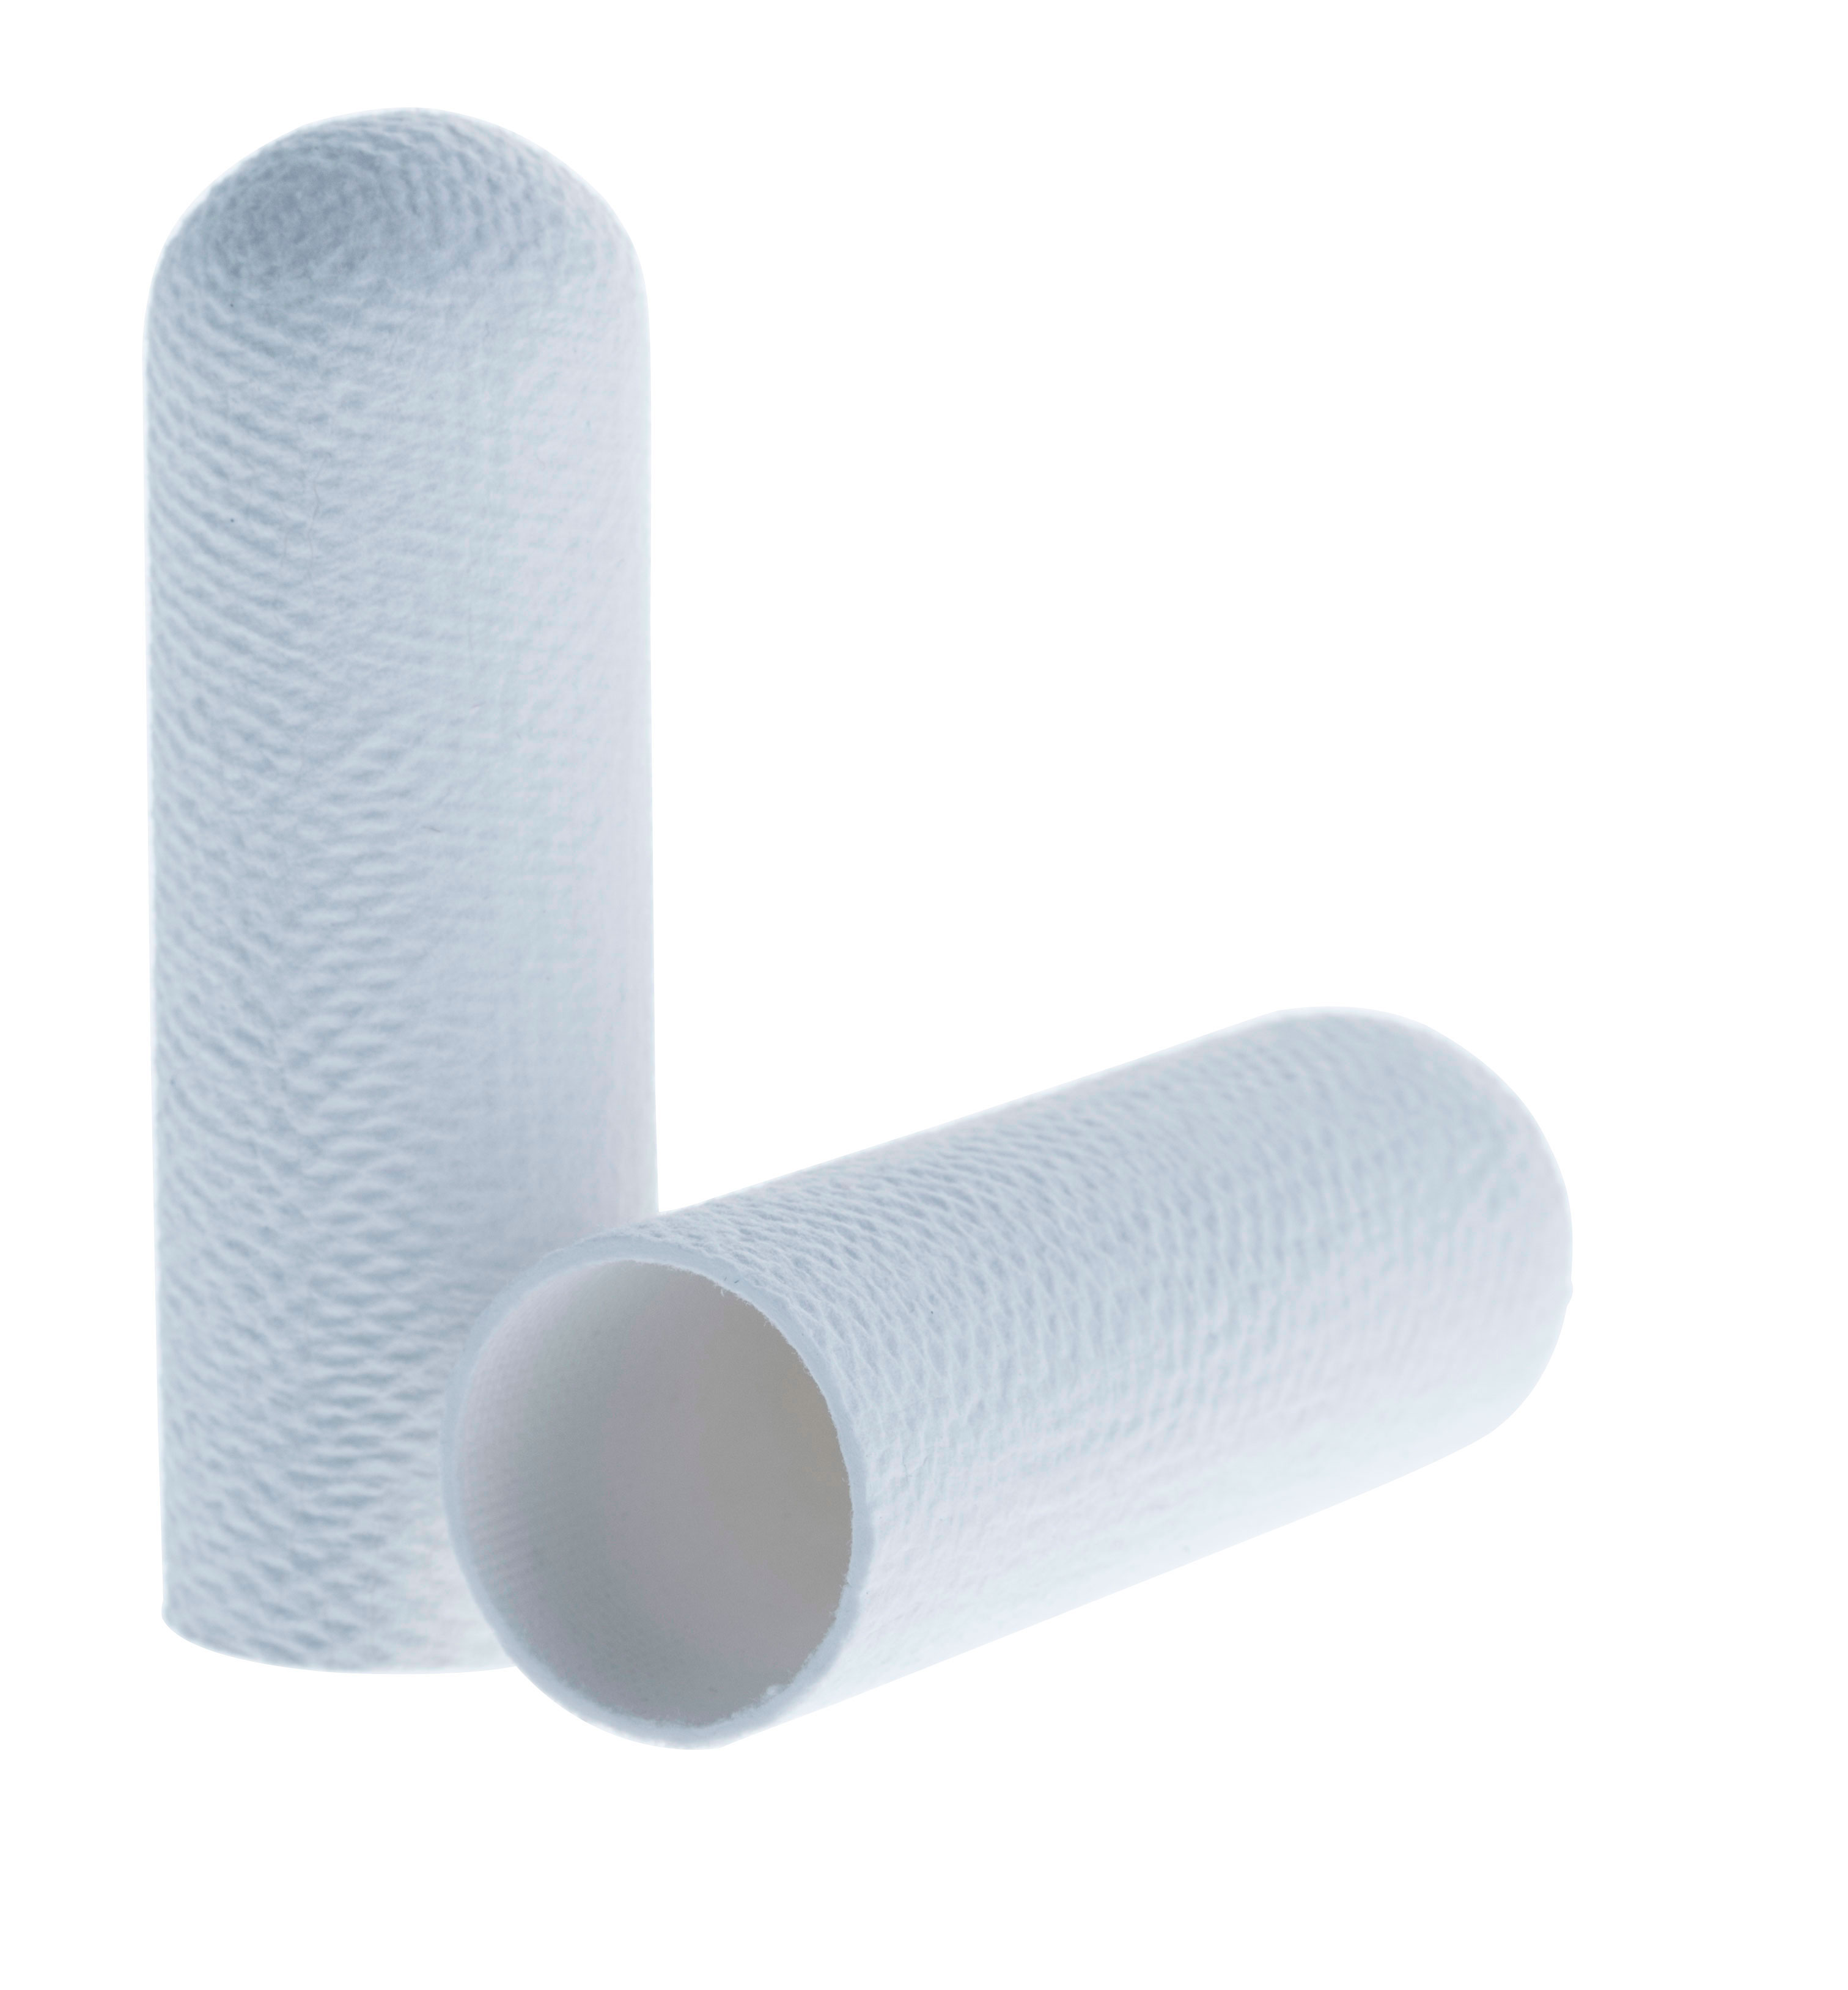 Cellulose extraction thimbles for Soxhlet extraction. SCHARLAU. Standard cellulose cartridge. Dim. Øxlength: 48x145mm. Particle retention in liquid: Nom. 8-15 microns